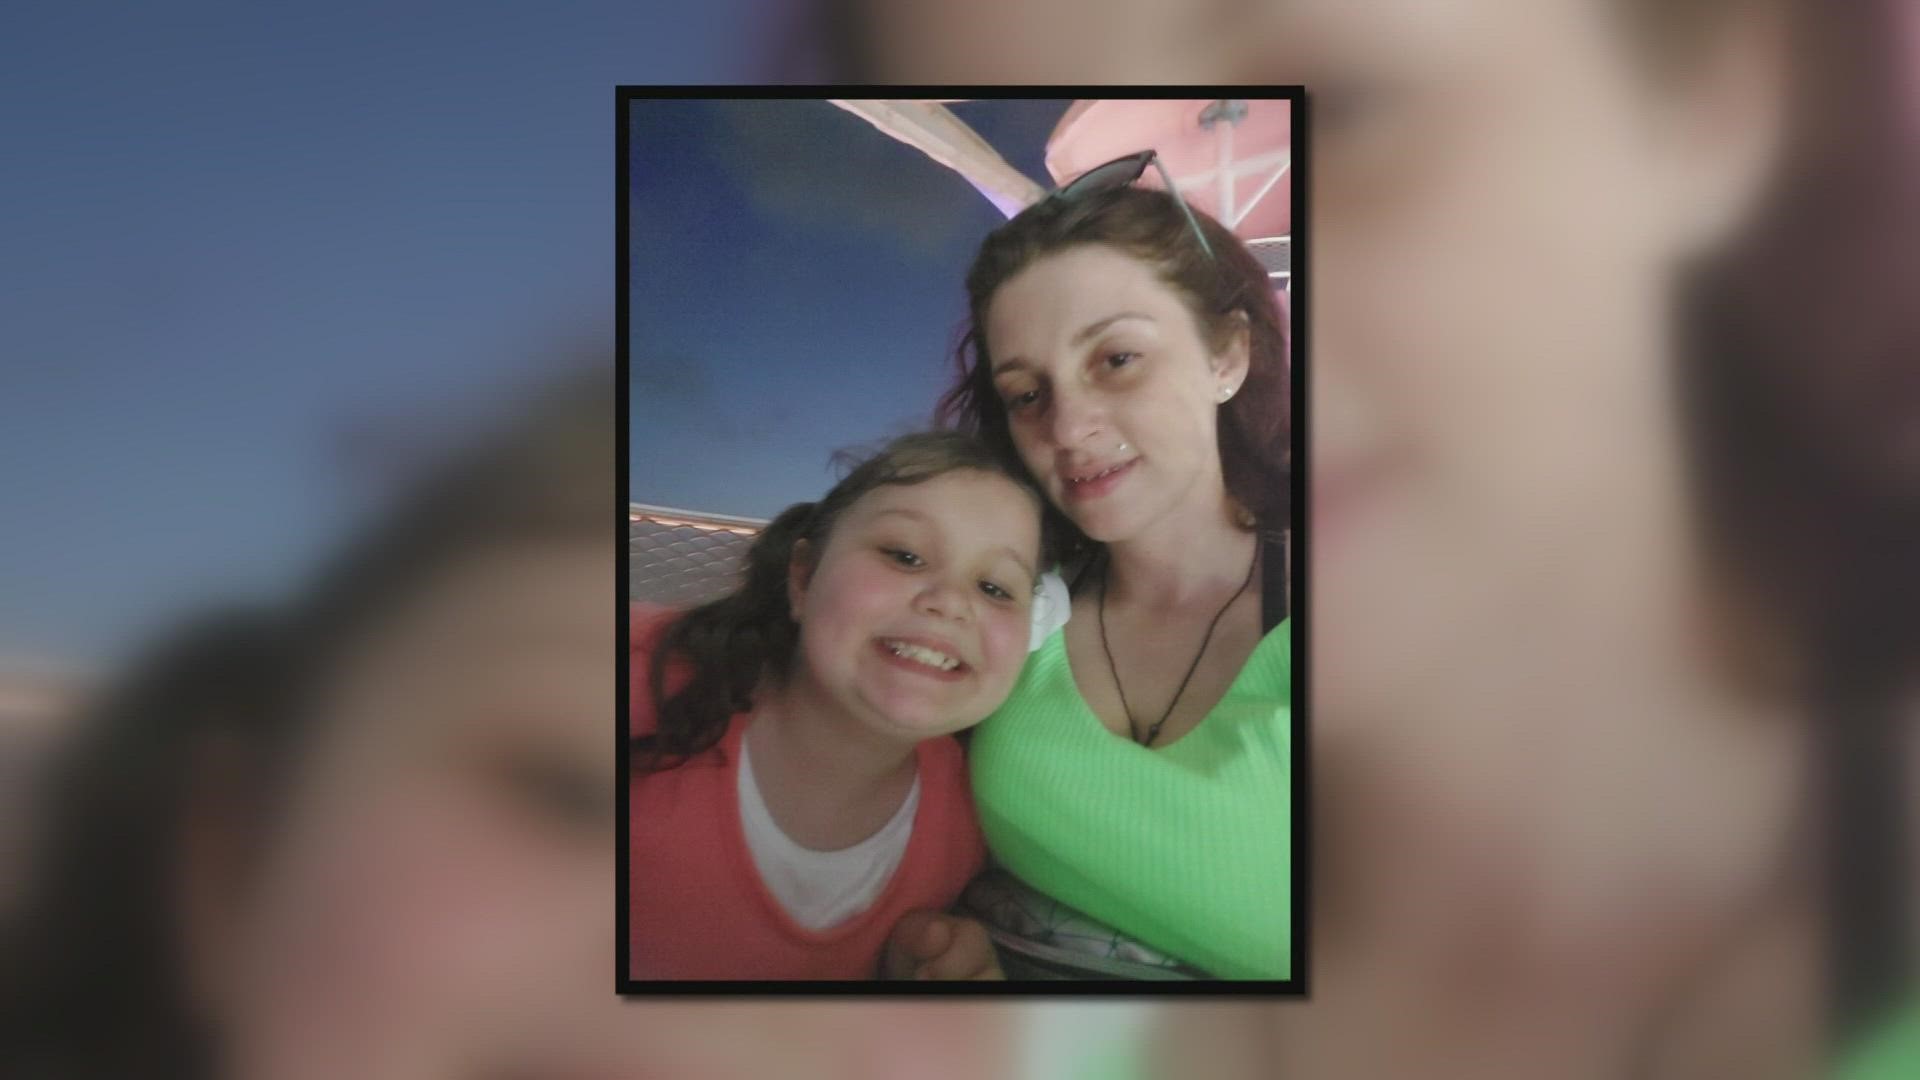 The 9-year-old girl who was hit by a dump truck in Plaquemines Parish will have a long road to recovery - more than a year - but she got some good news Thursday.